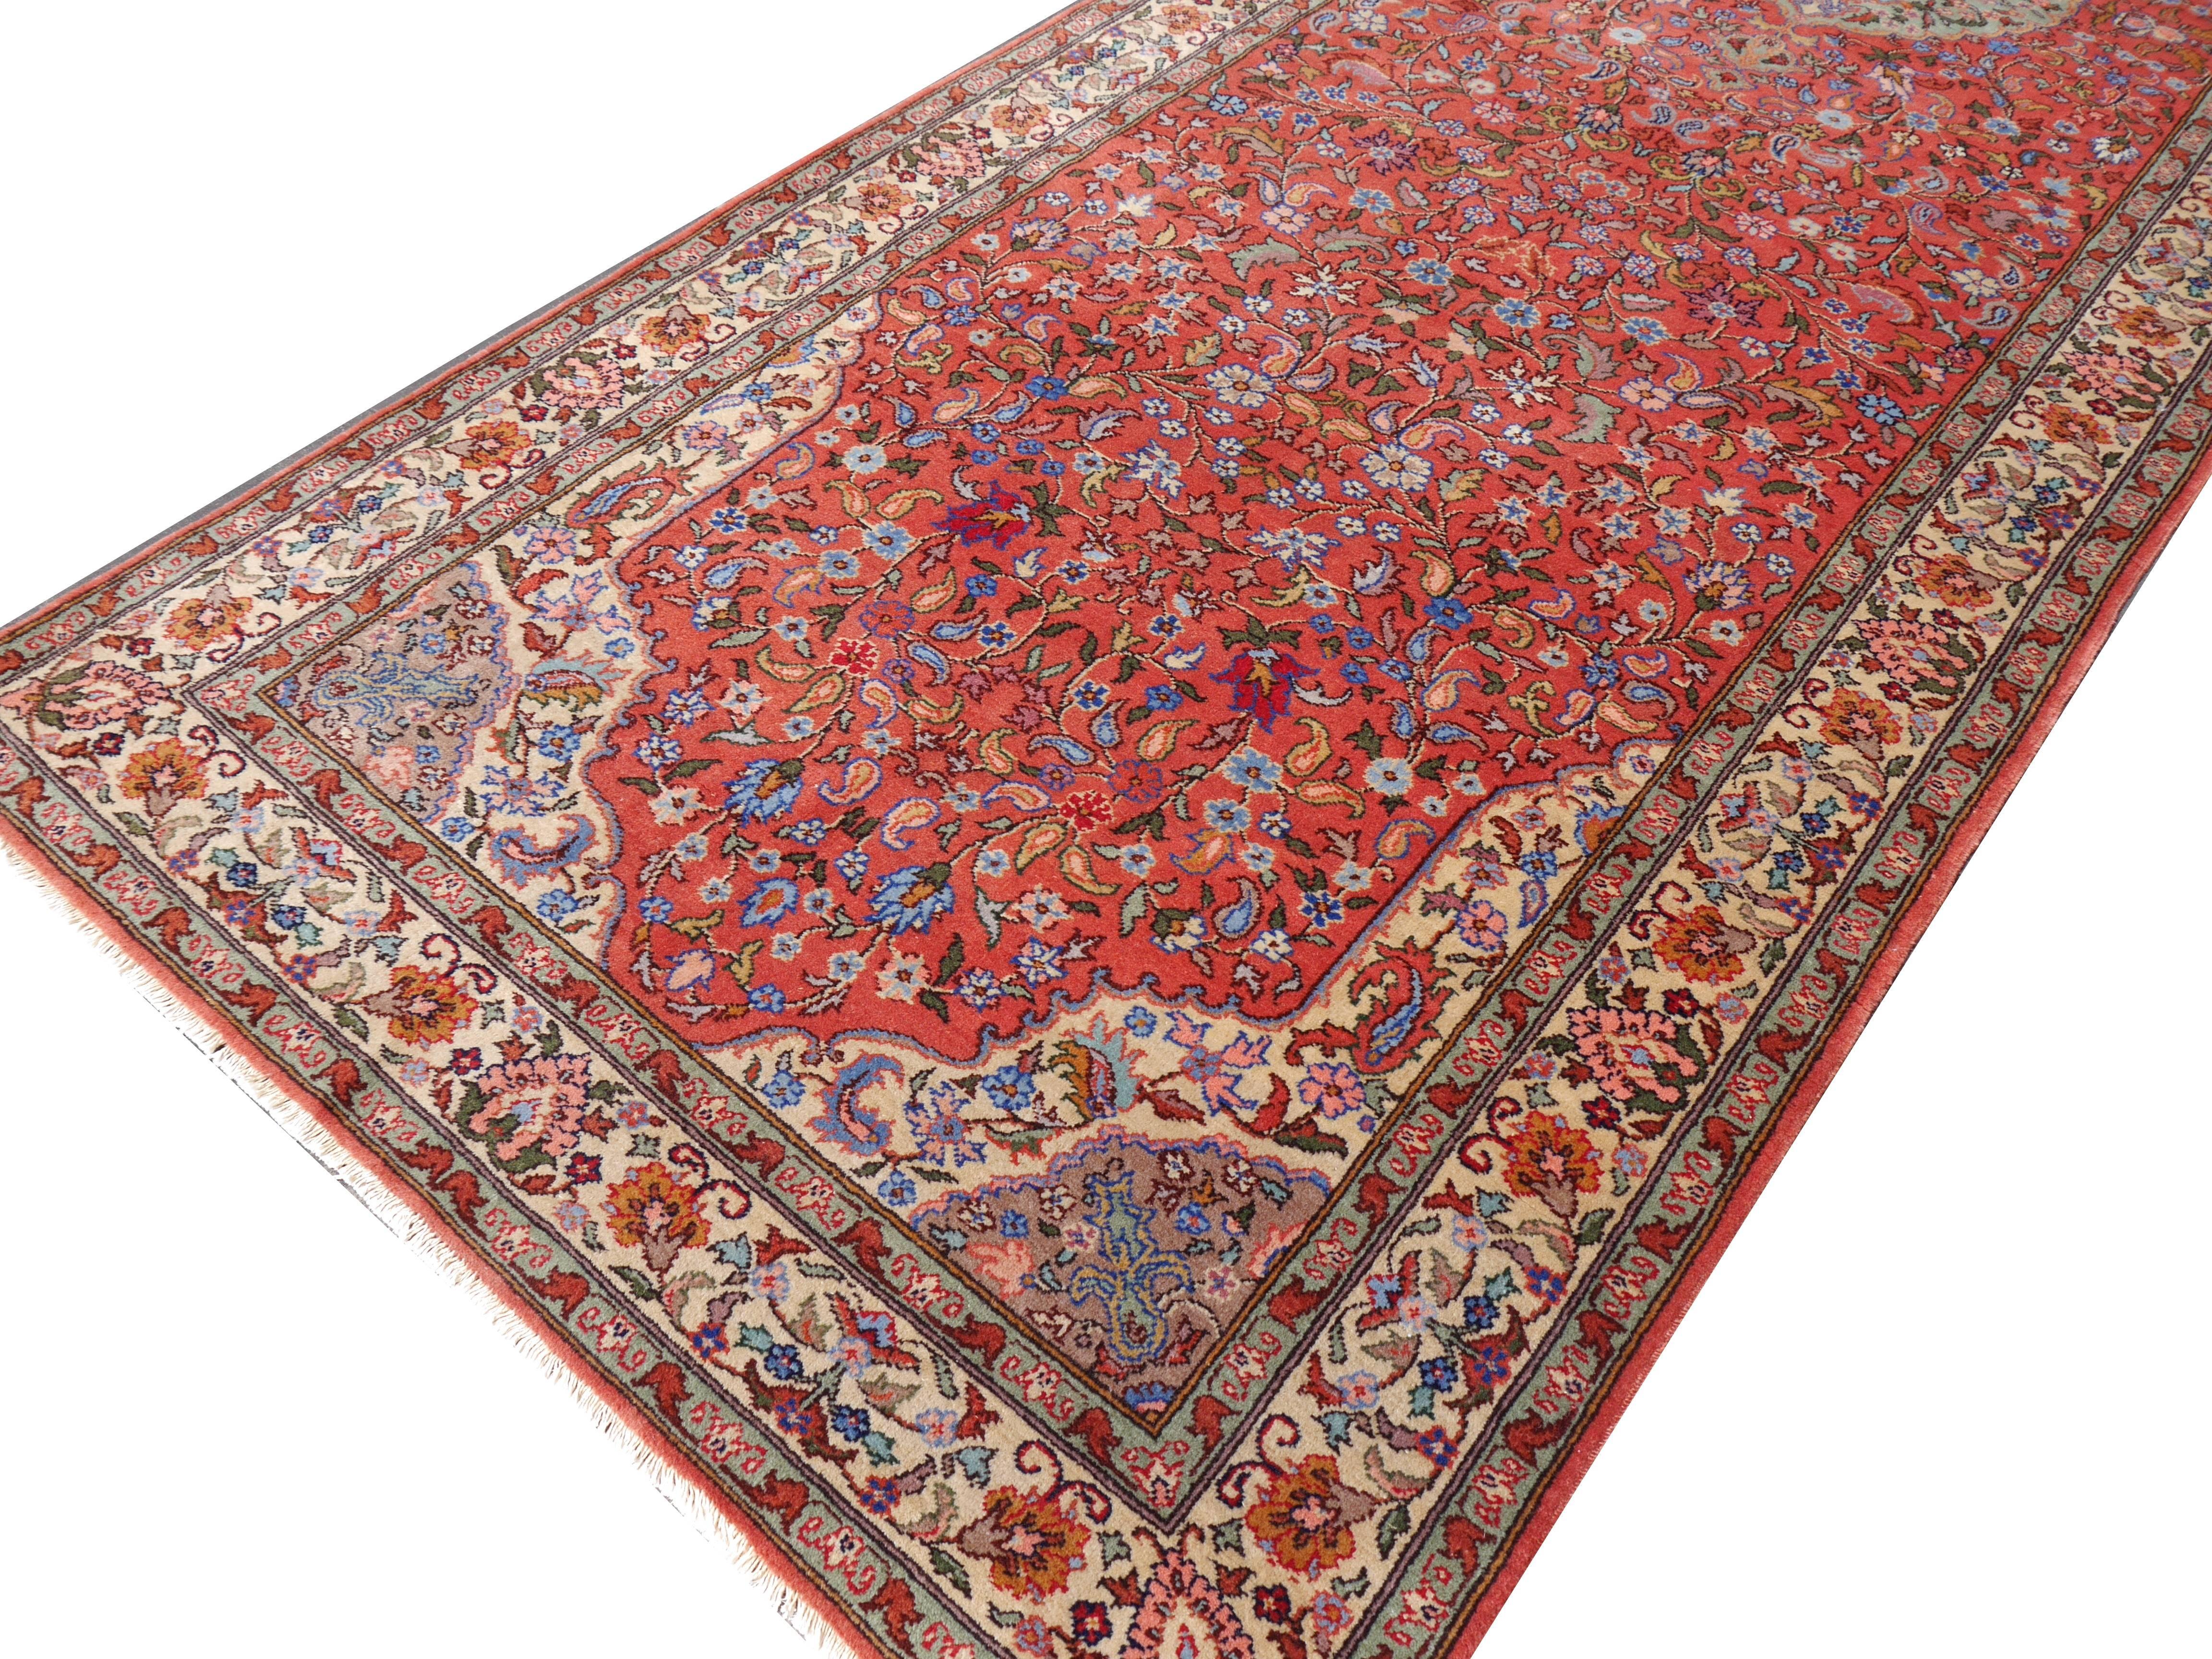 Romanian Large European Hand-Knotted Vintage Rug with Tabriz Design For Sale